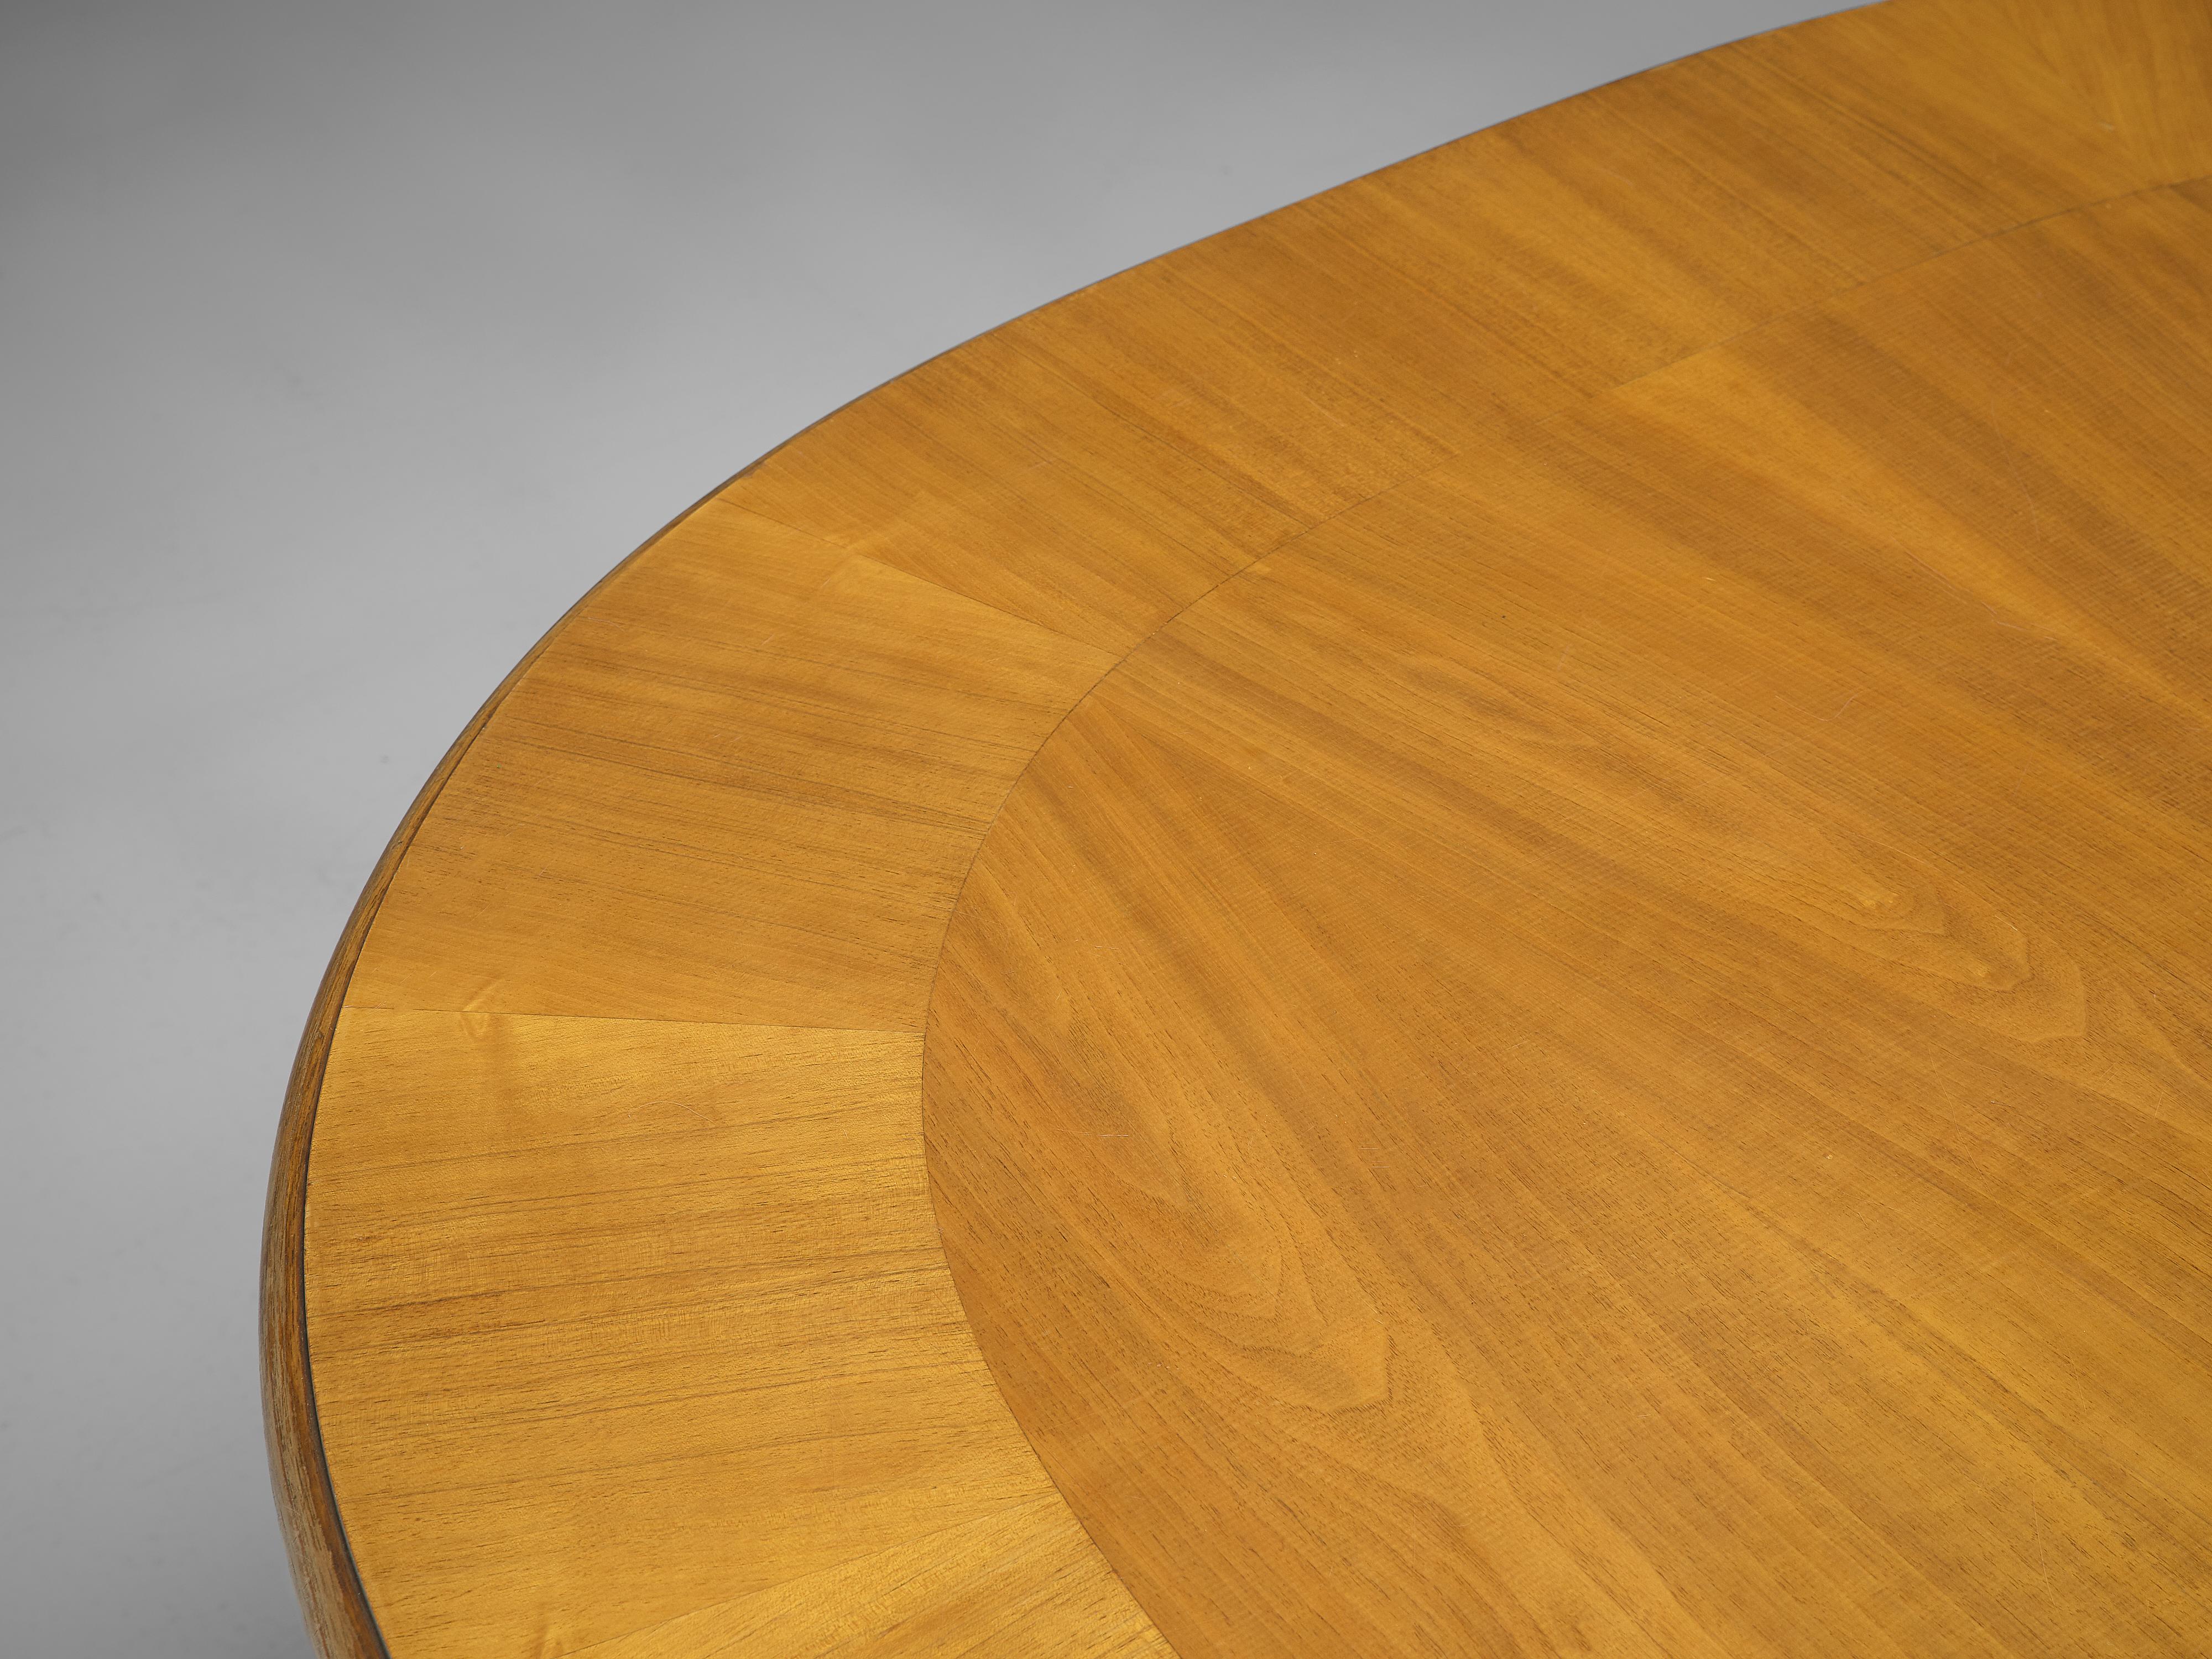 Large Oval Conference Table in Walnut 15ft